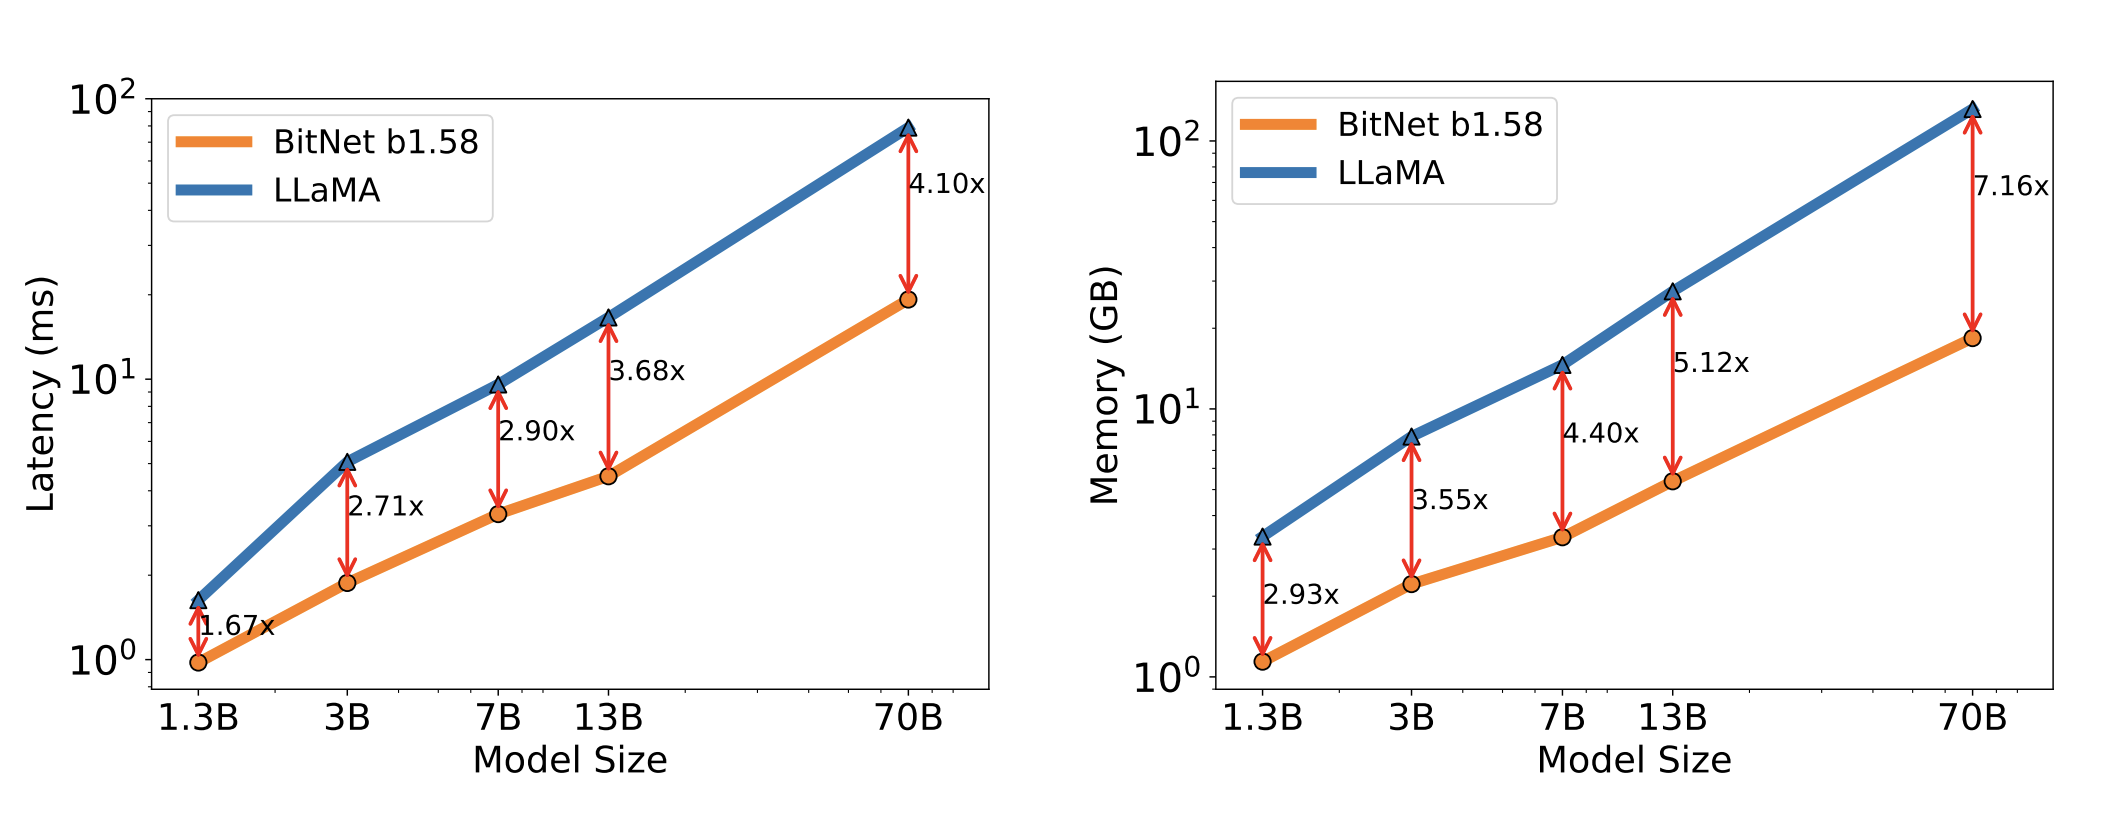 Latency and memory consumption are (not surprisingly) dramatically better for the authors' models with ternary as opposed to full 16-bit FP weights